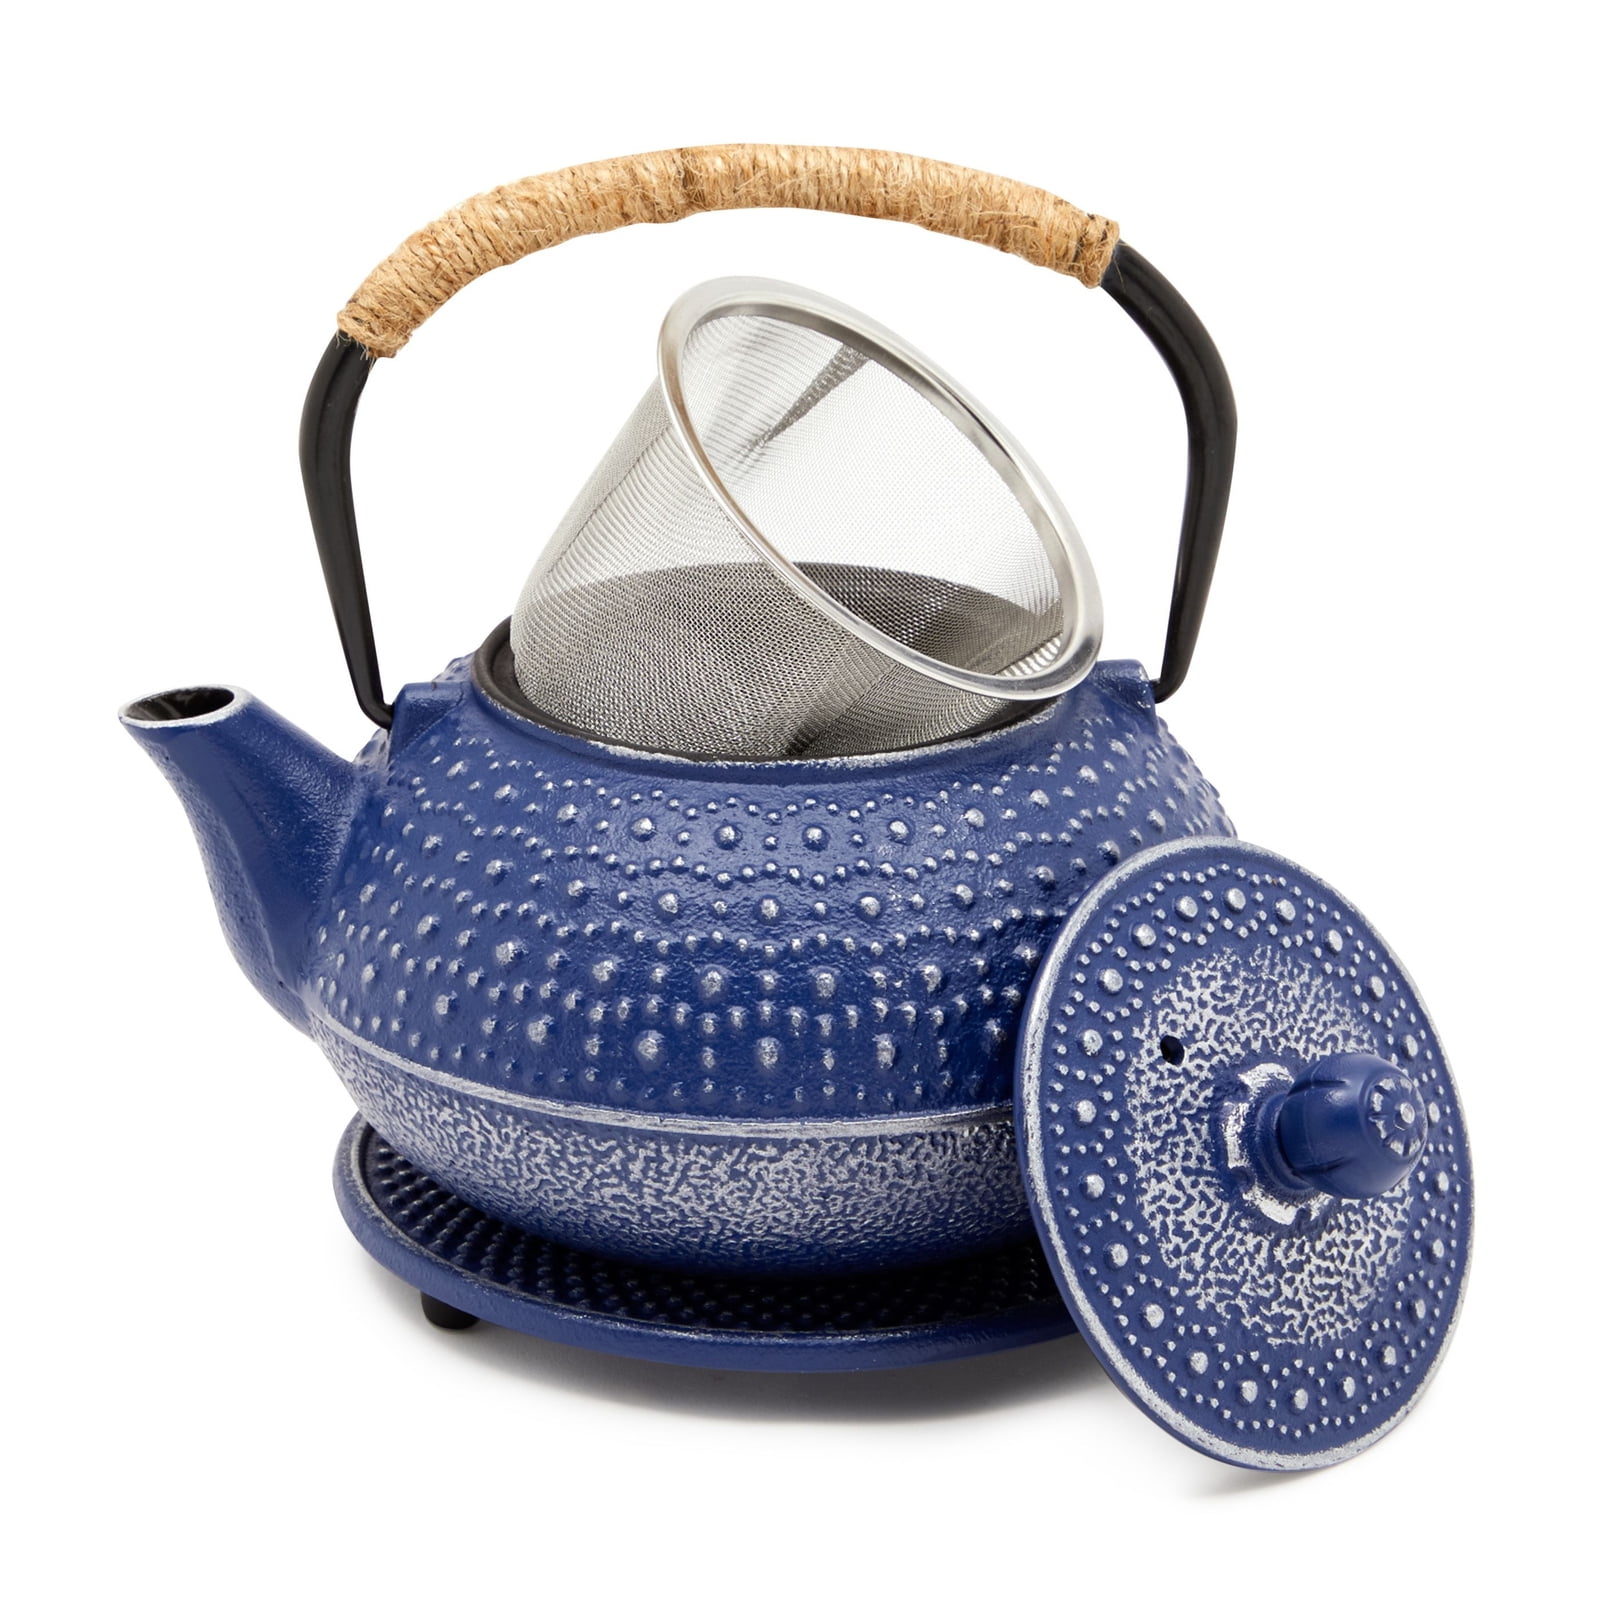 Japanese Tetsubin Teapot Coated with Enameled Interior Cast Iron Tea Kettle Stovetop Safe Blue Cherry Blossom Pattern, 1000ml/34oz Durable Cast Iron Teapot with Stainless Steel Infuser 